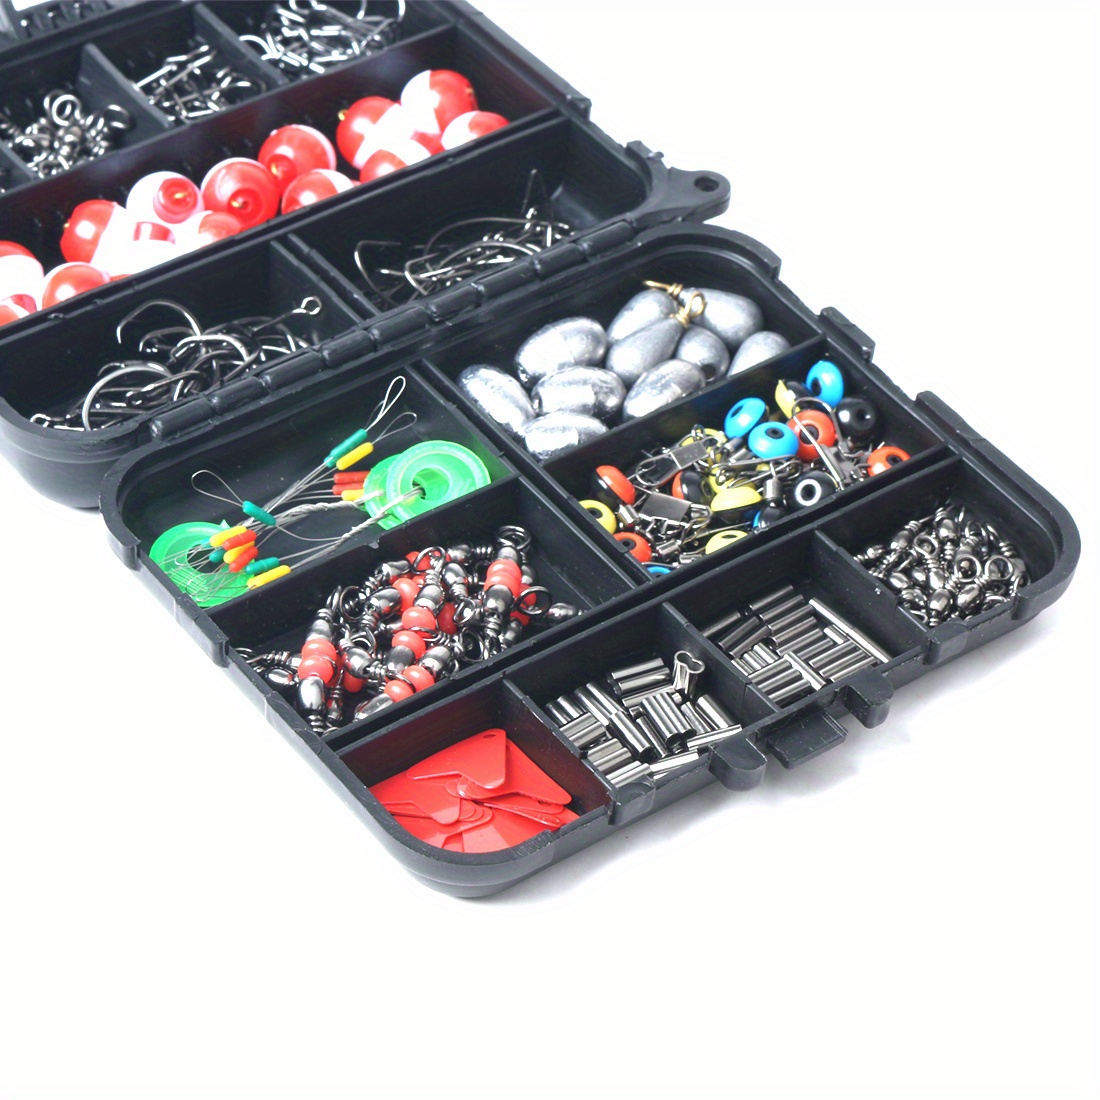 Portable Fishing Accessories Kit Set - Includes Tackle Box,  Saltwater/Freshwater Fish Hooks, Bait Parts - Perfect for Travel and  Outdoor Fishing